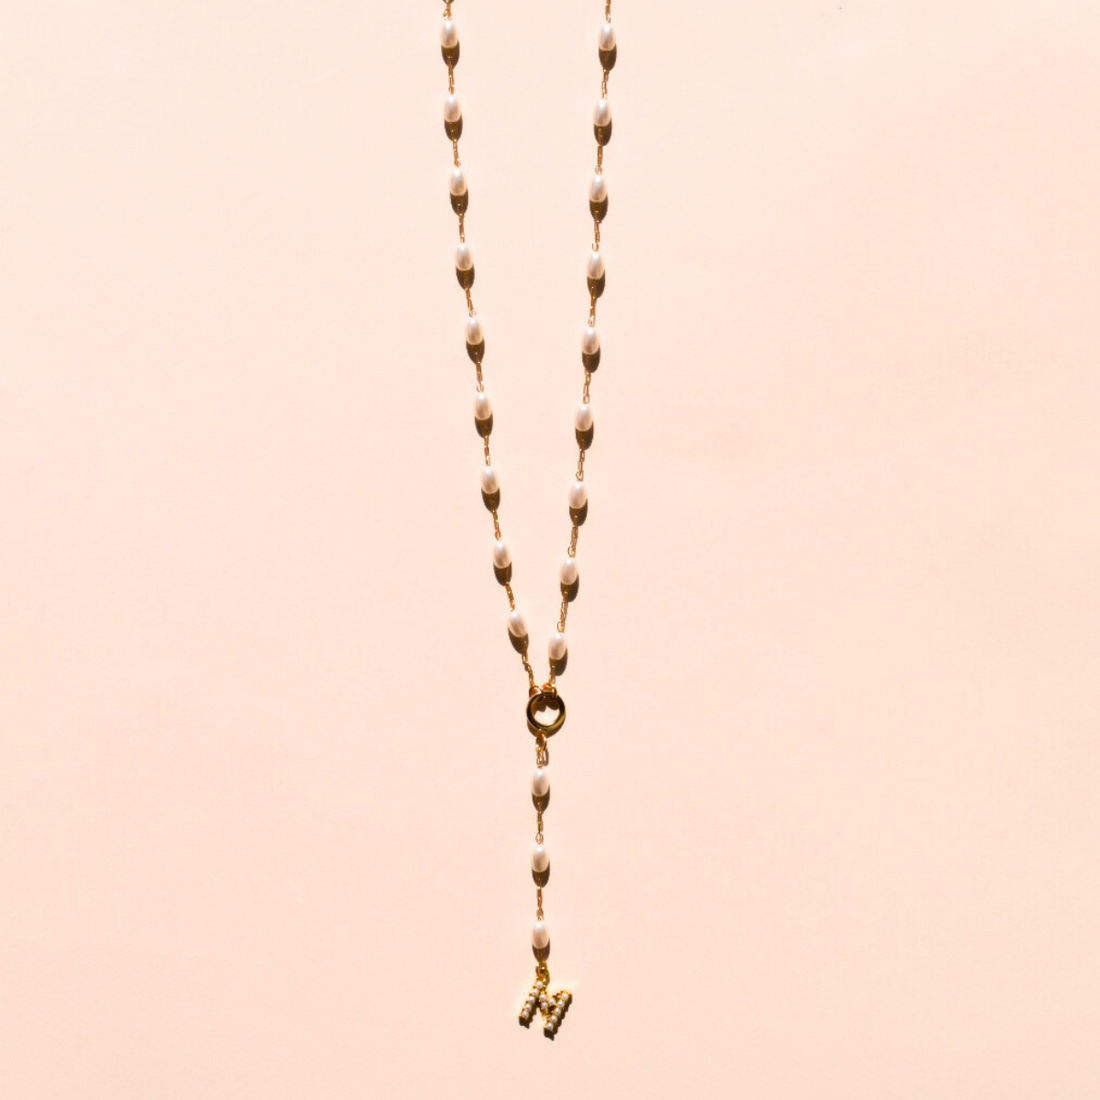 The Lariat From Southern Bell Necklace